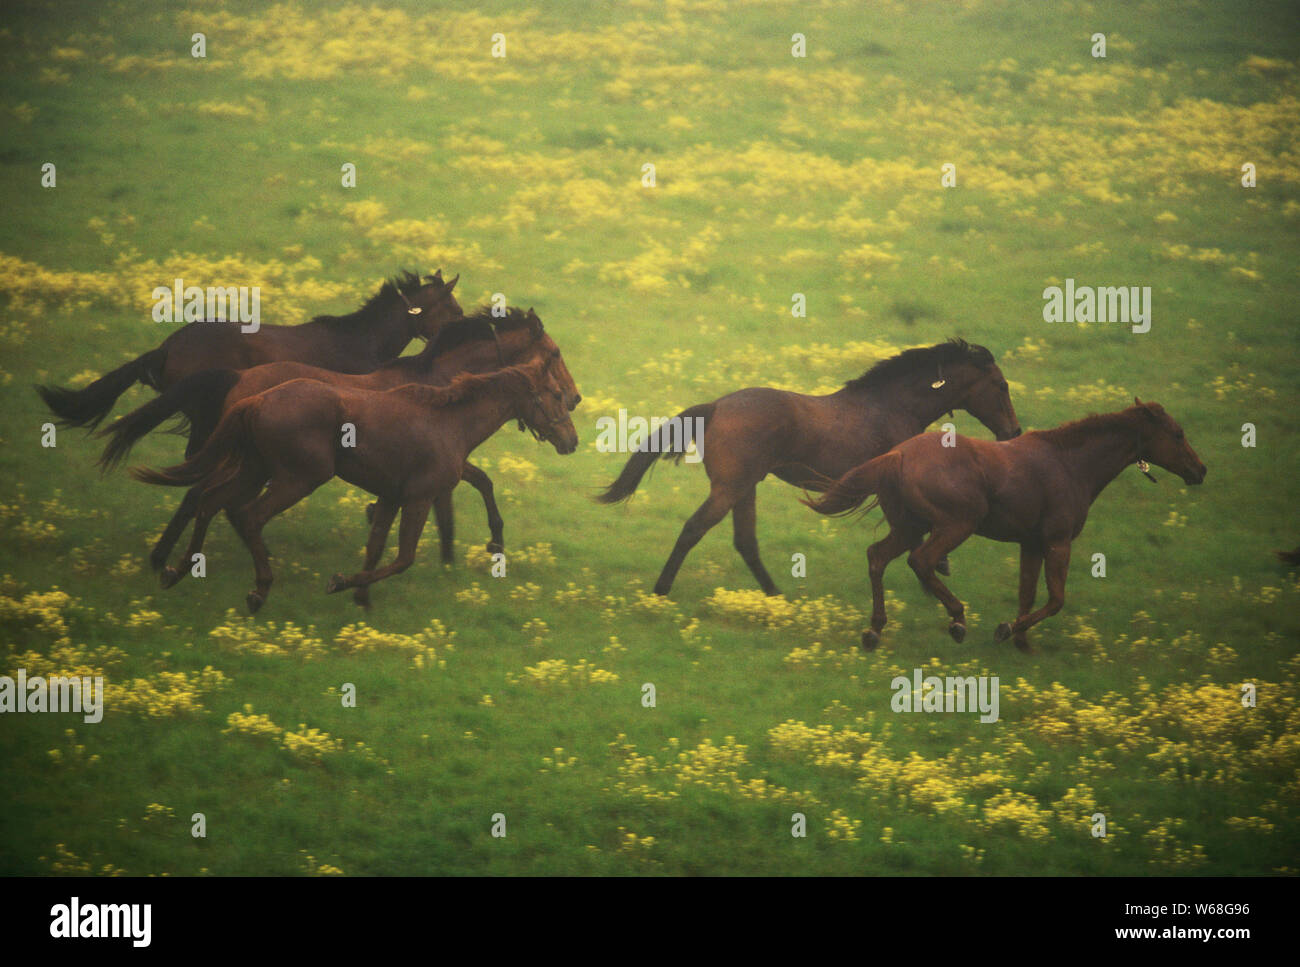 Horses running across field with yellow flowers Stock Photo